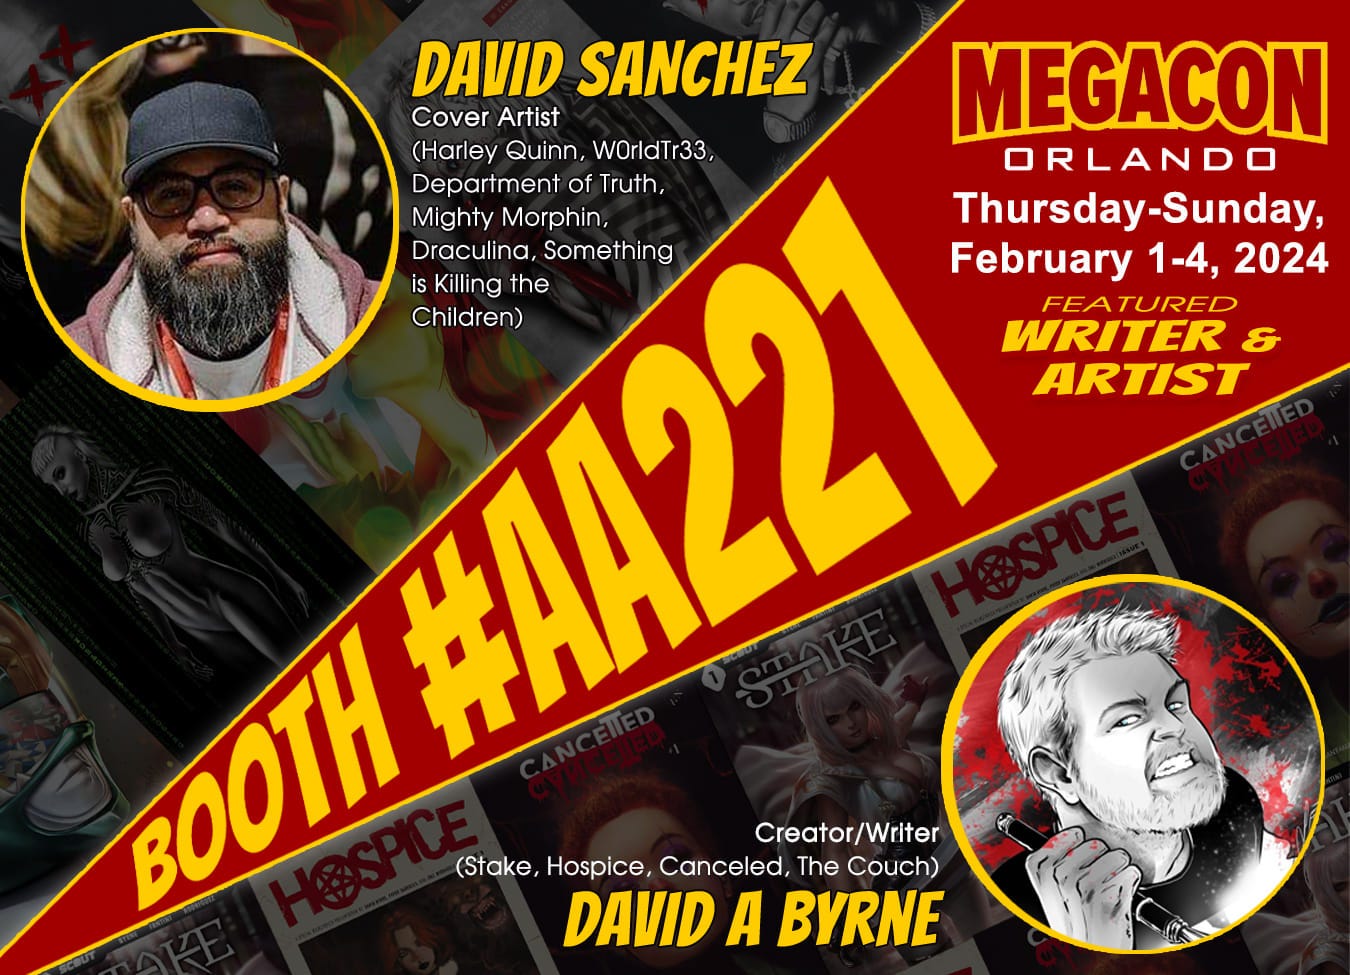 May be an image of 1 person and text that says 'DAVID SANCHEZ Cover Artist (Harley Quinn, WorldTr33, Department of Truth, Mighty Morphin, Draculina, Something is Killing the Children) MEGACON ORLANDO Thursday-Sunday -Sunday, February 1-4, 2024 FEATURED WRITER ARTIST BOOTH (Stake, Hospice, Canceled, The Couch) Creator/Writer DAVID A BYRNE'